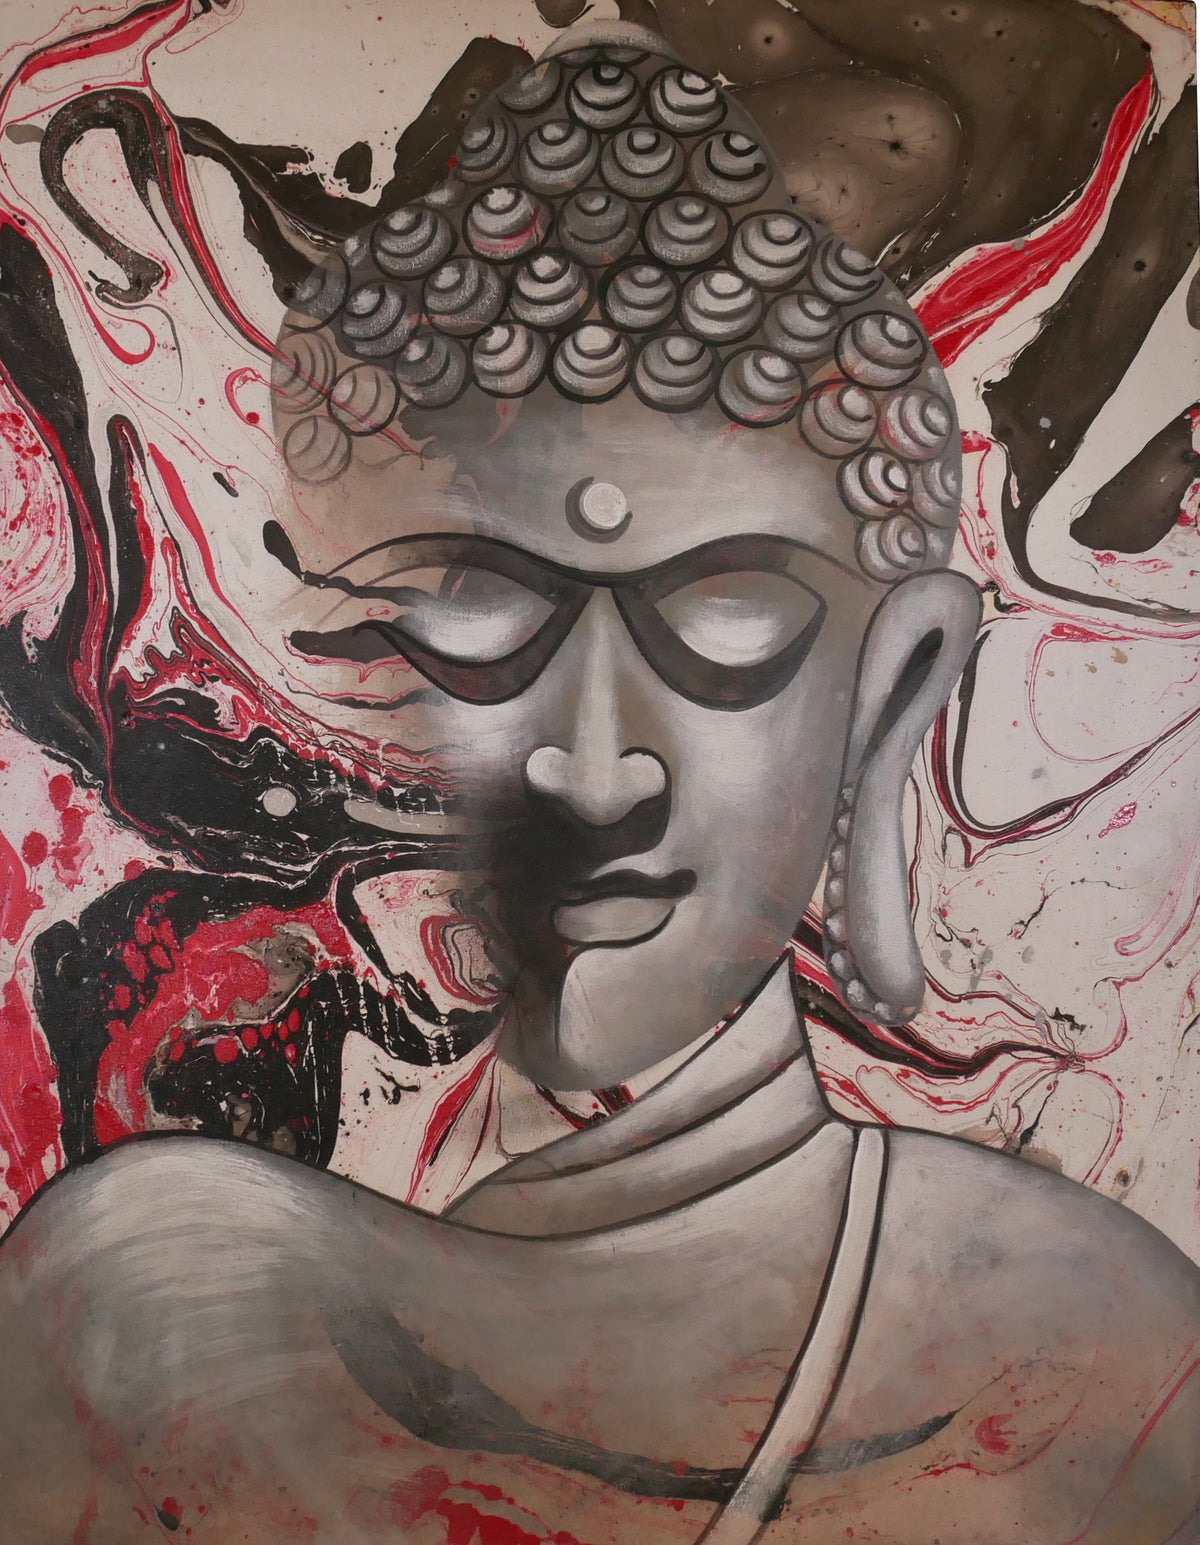 “Inhaling Buddha Head” Painting in Grey, Black and Red on White – Acrylic on Canvas (70x90 cm)